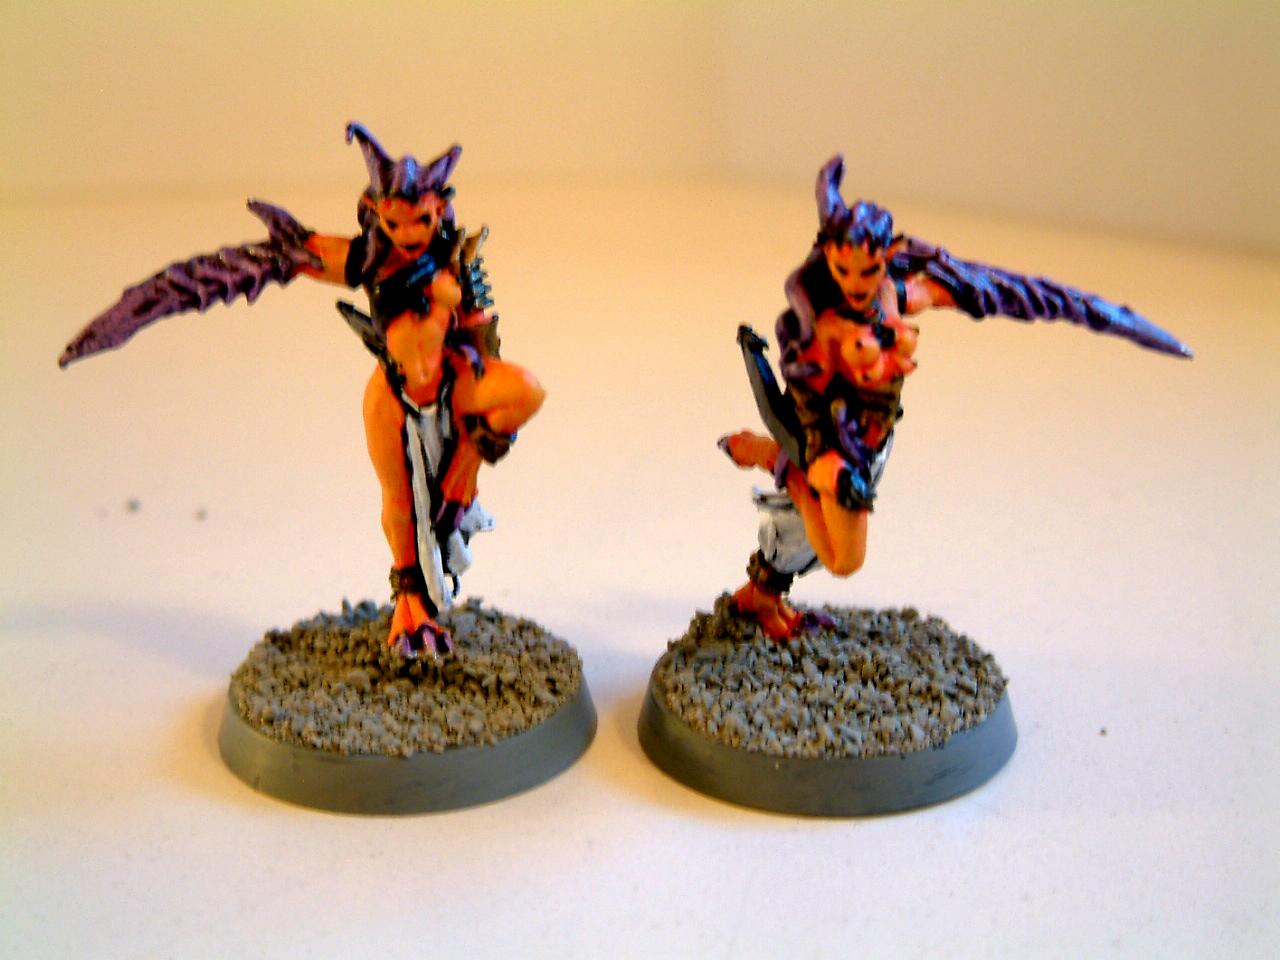 Chaos, Classic, Daemonettes, Daemons, Fiends, Green, Old, Orange, Out Of Production, Purple, Slaanesh, Warhammer 40,000